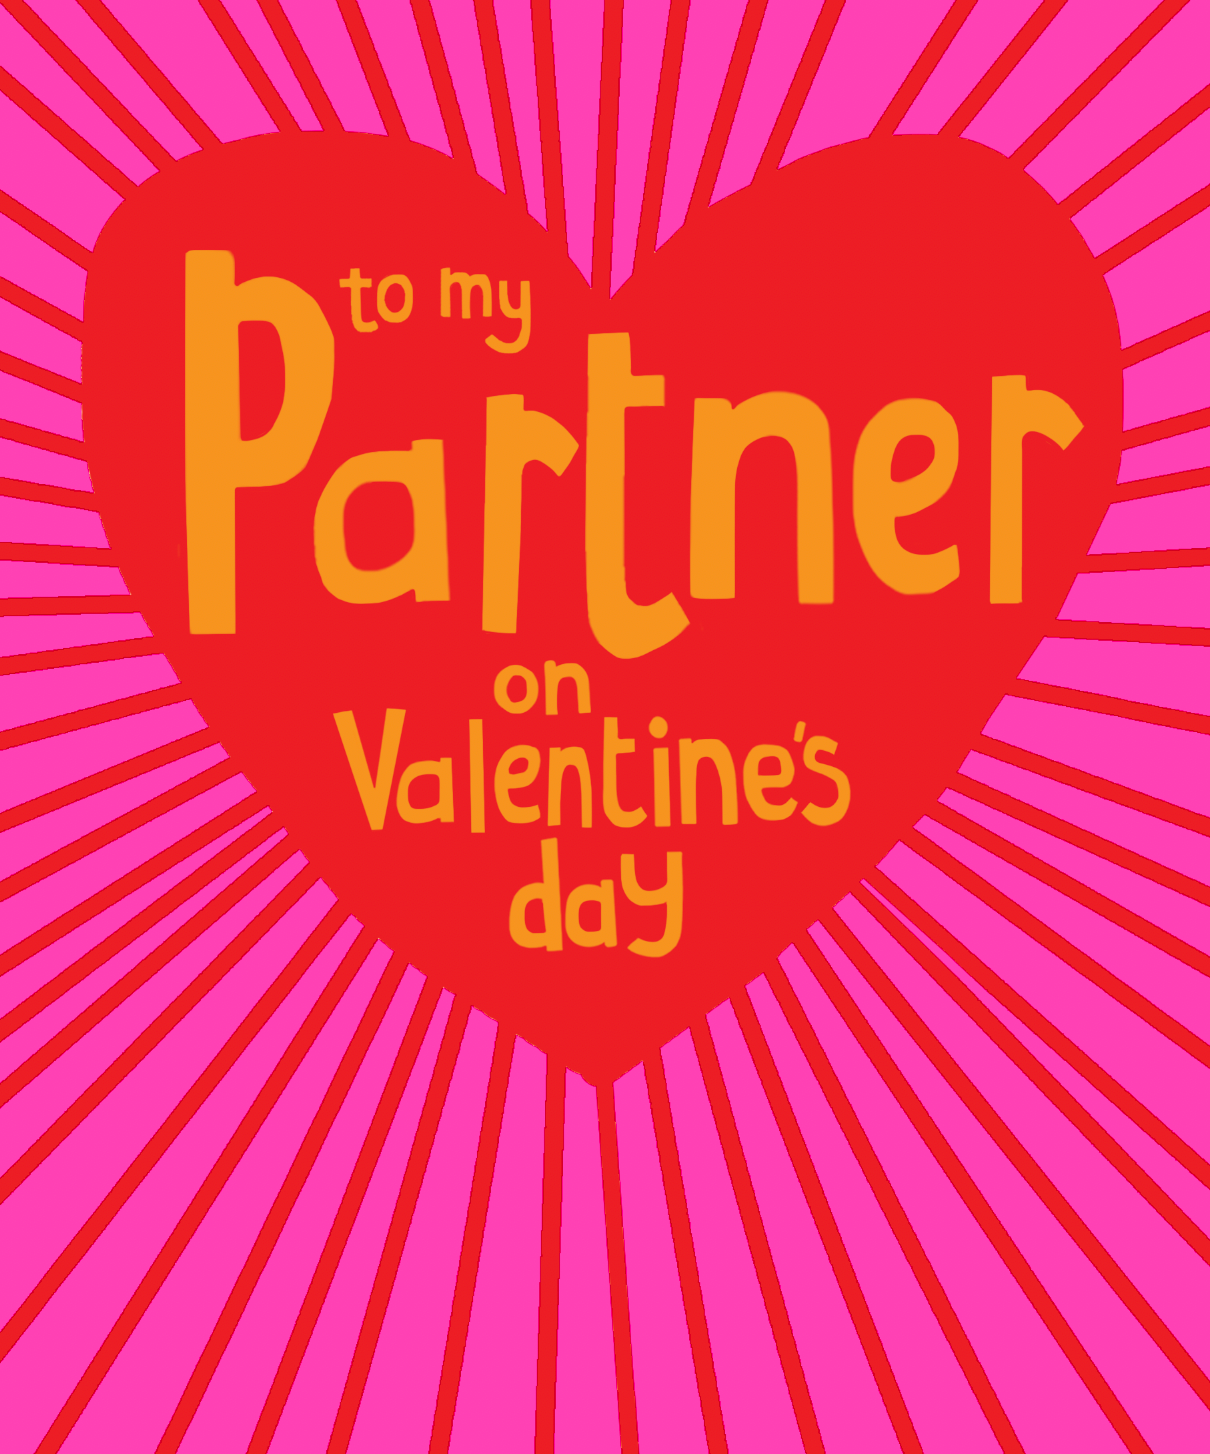 Valentine's Day Cards for Partners & Friends